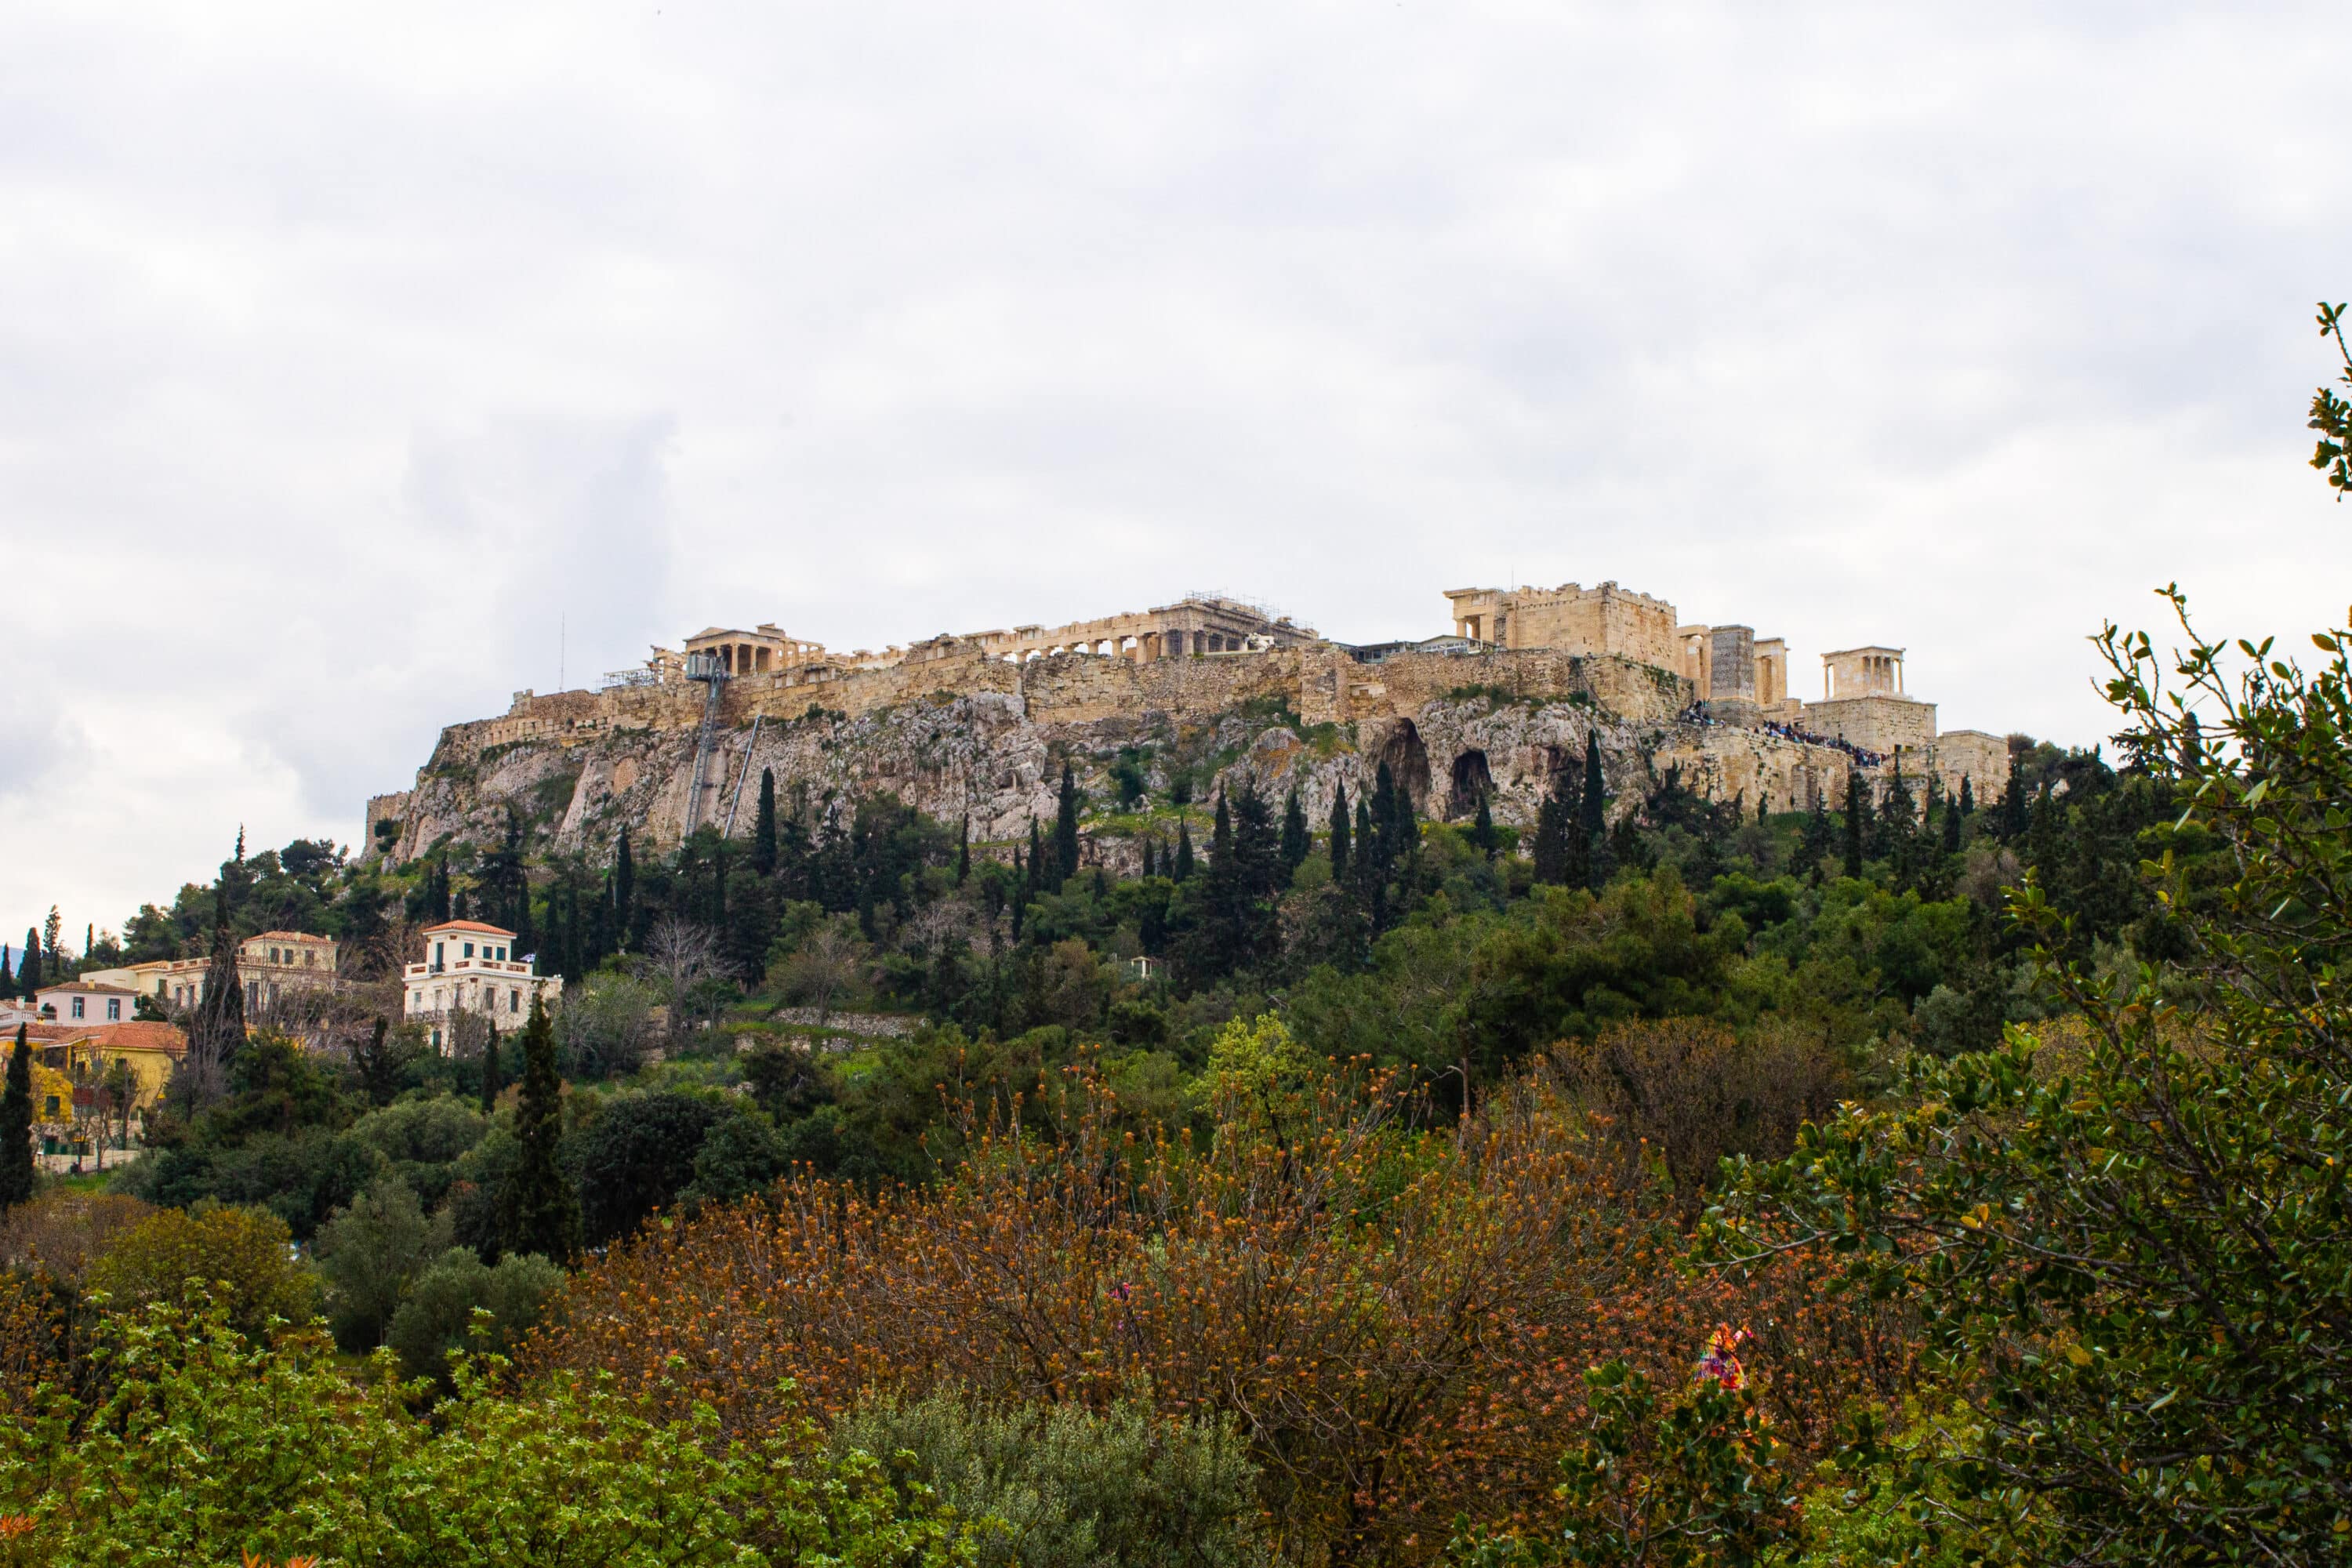 view of the Acropolis from the Agora in Athens